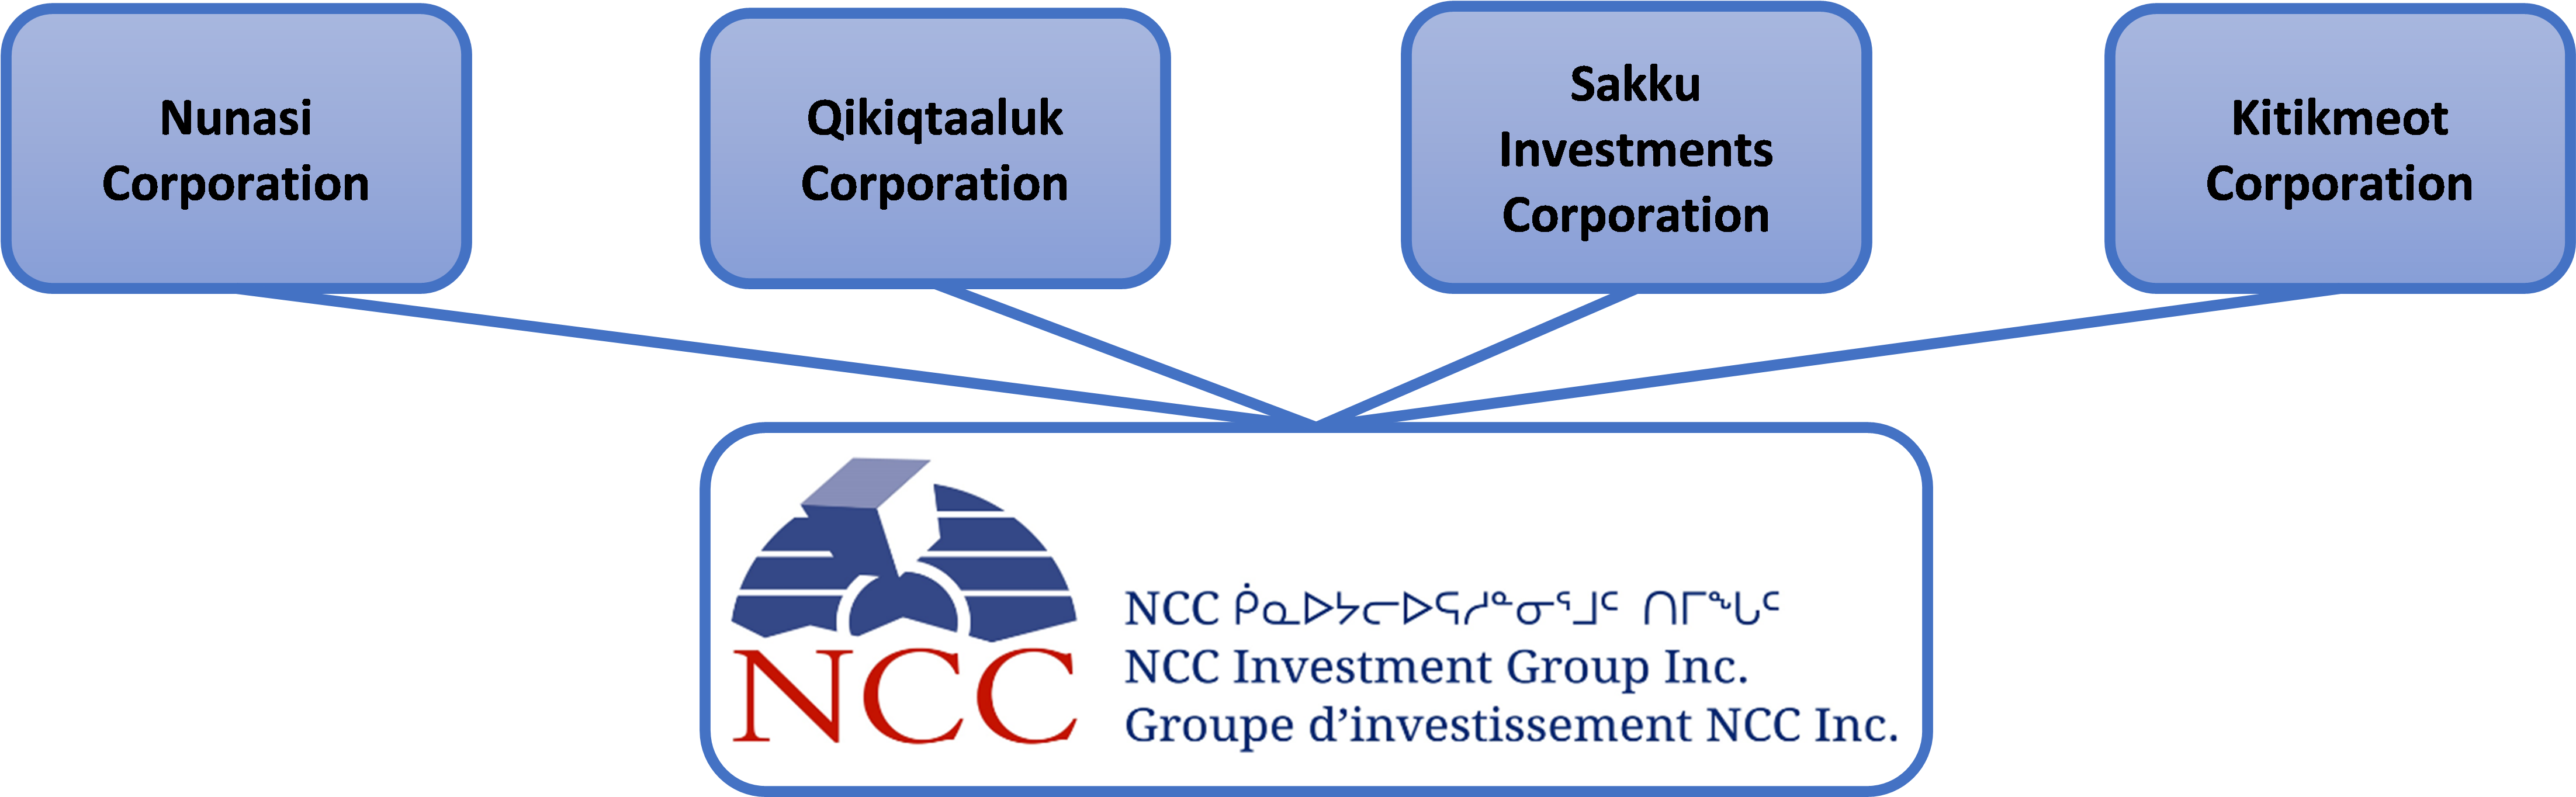 NCC Investment Group Ownership Chart